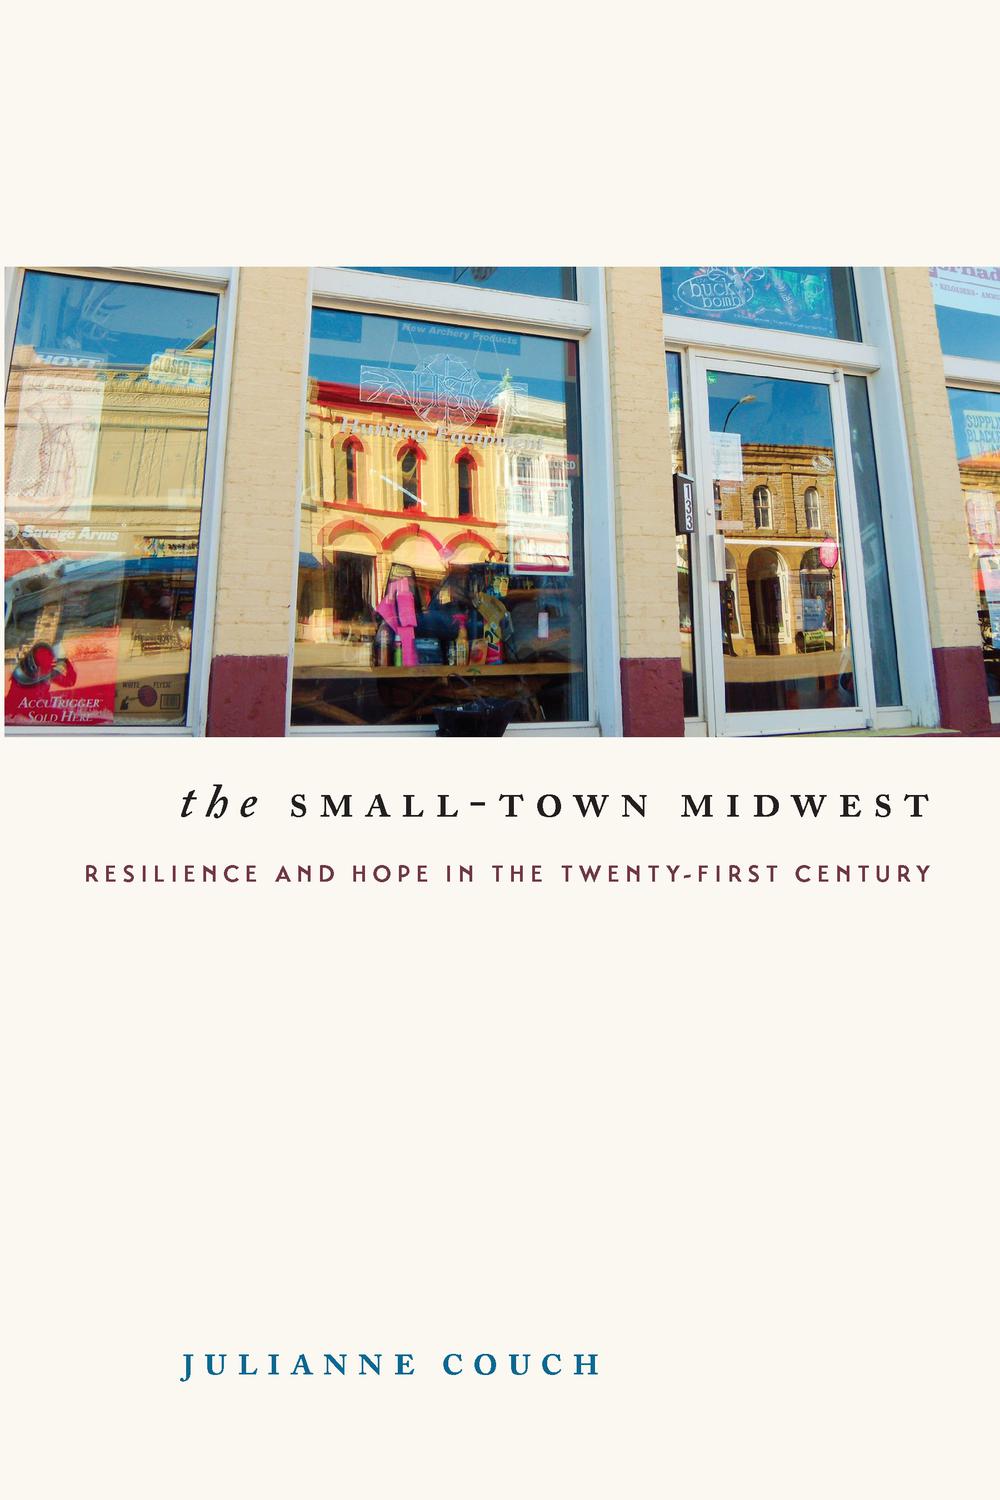 The Small-Town Midwest - Julianne Couch